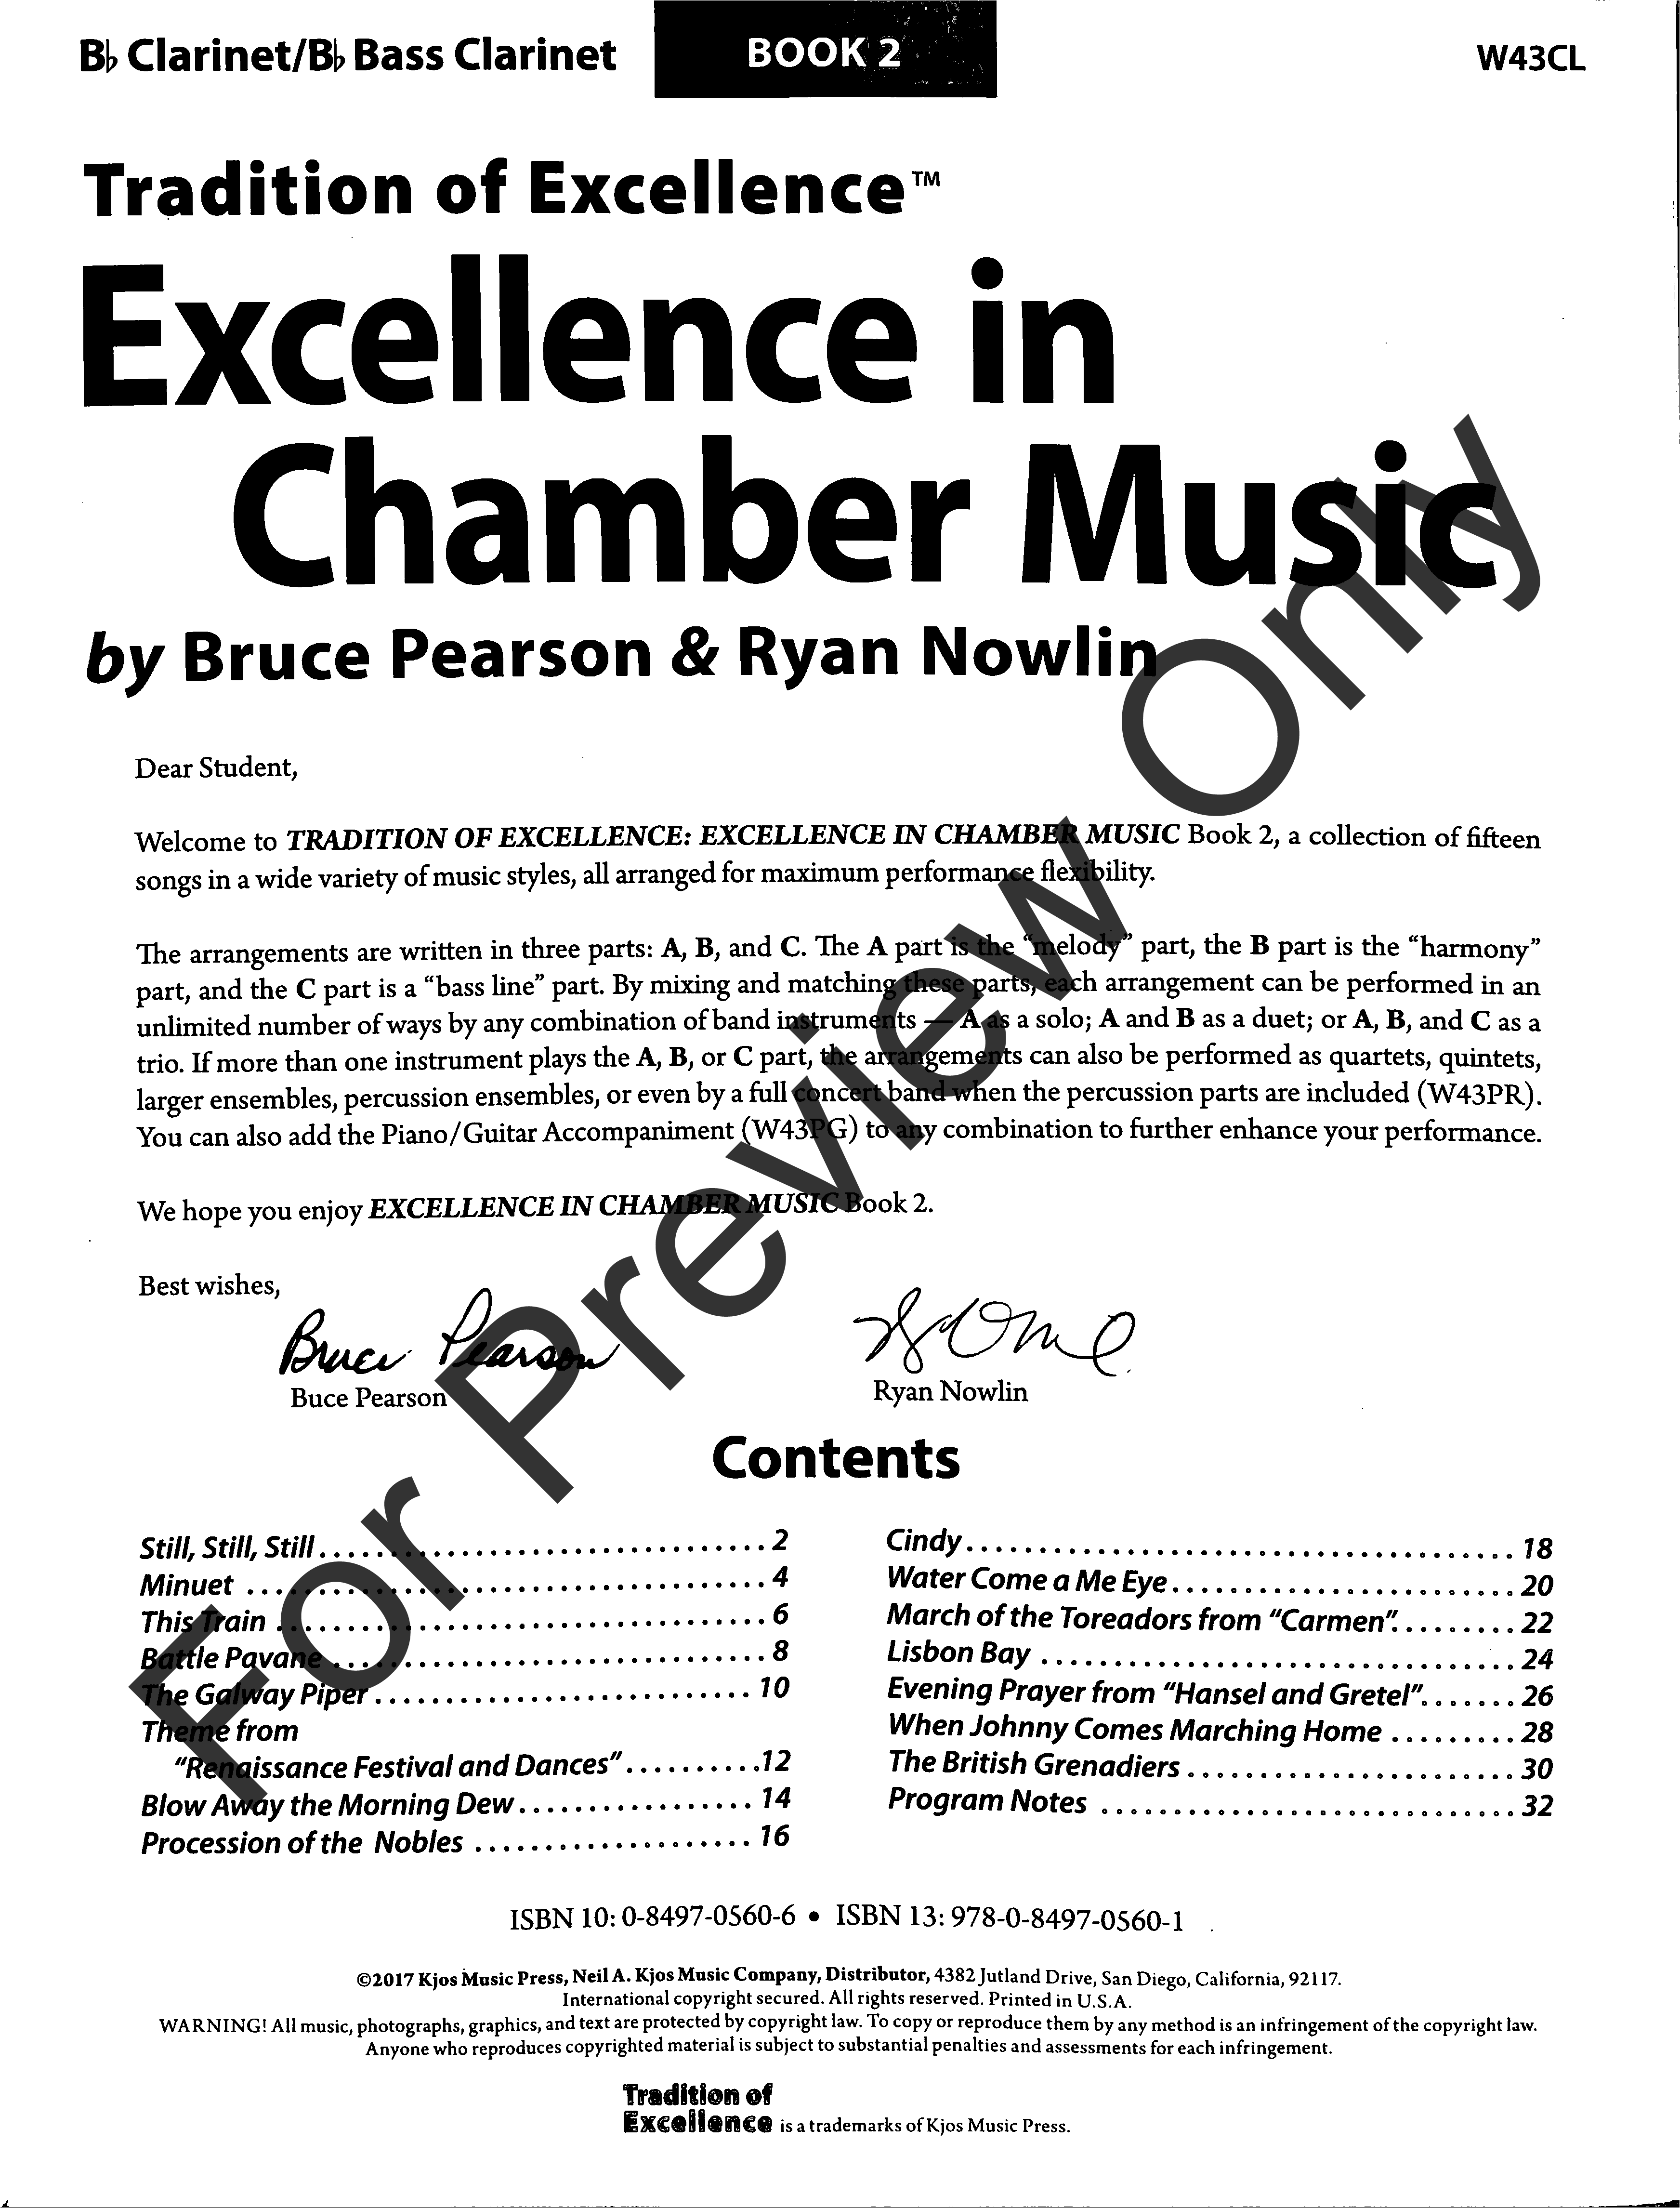 Excellence in Chamber Music #2 Clarinet / Bass Clarinet Book